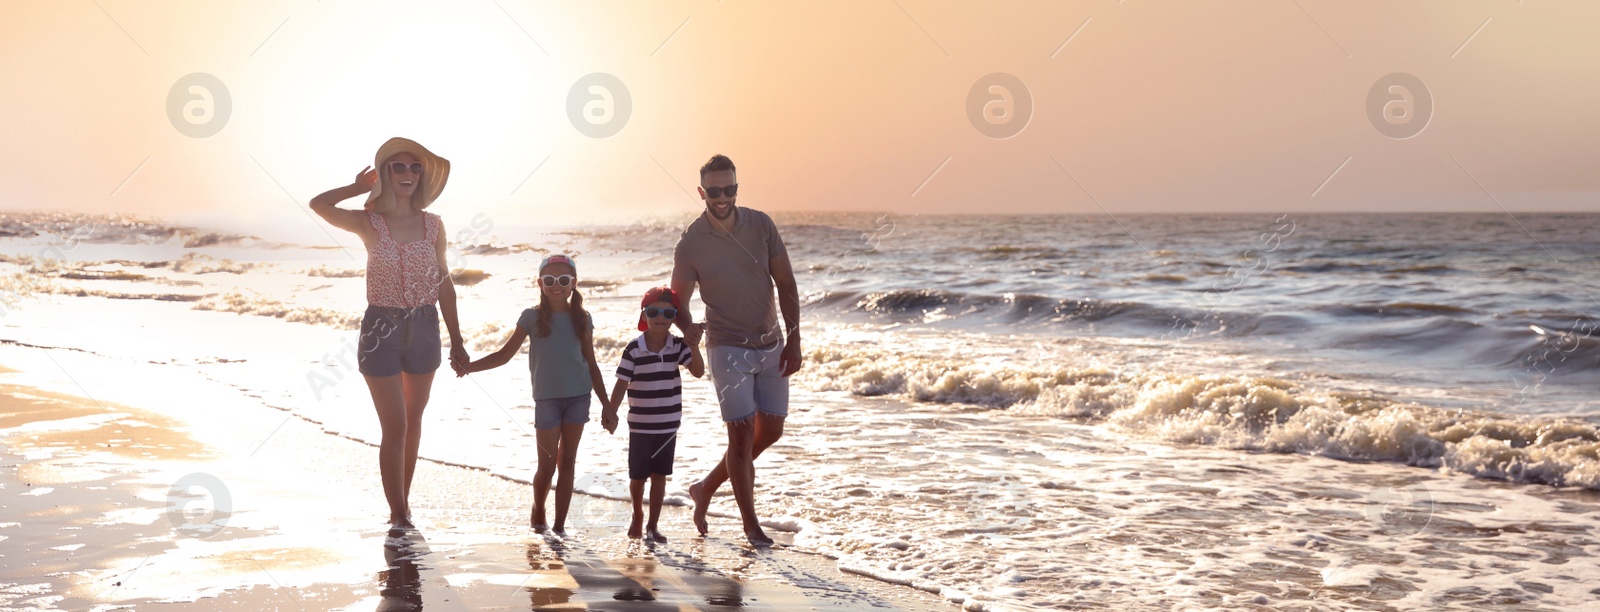 Image of Happy family on sandy beach near sea, space for text. Banner design